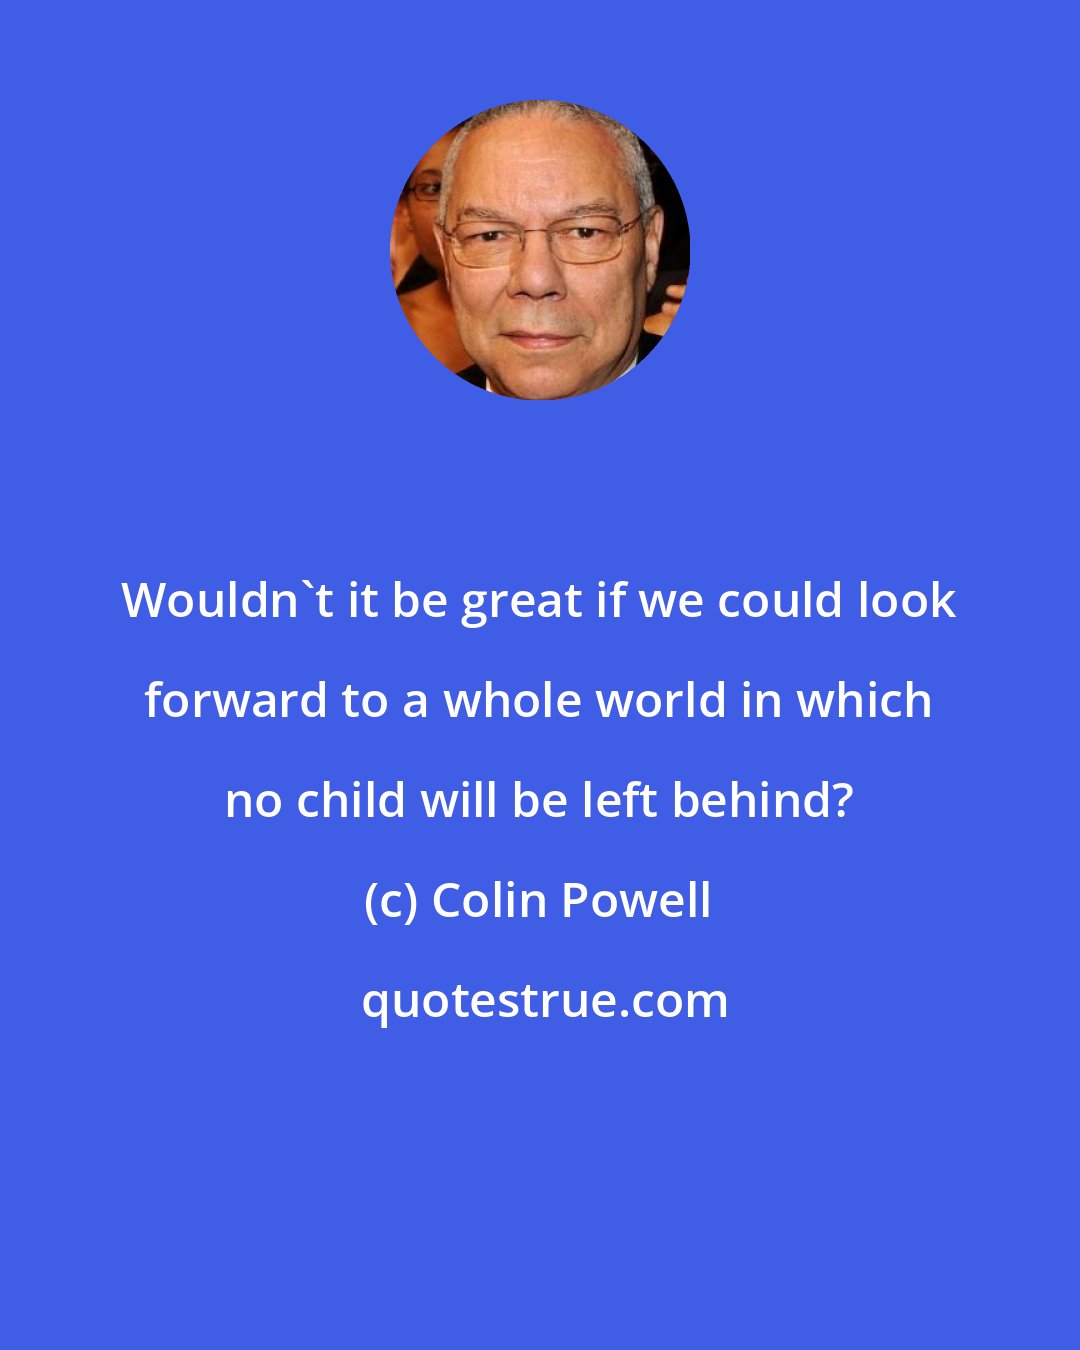 Colin Powell: Wouldn't it be great if we could look forward to a whole world in which no child will be left behind?